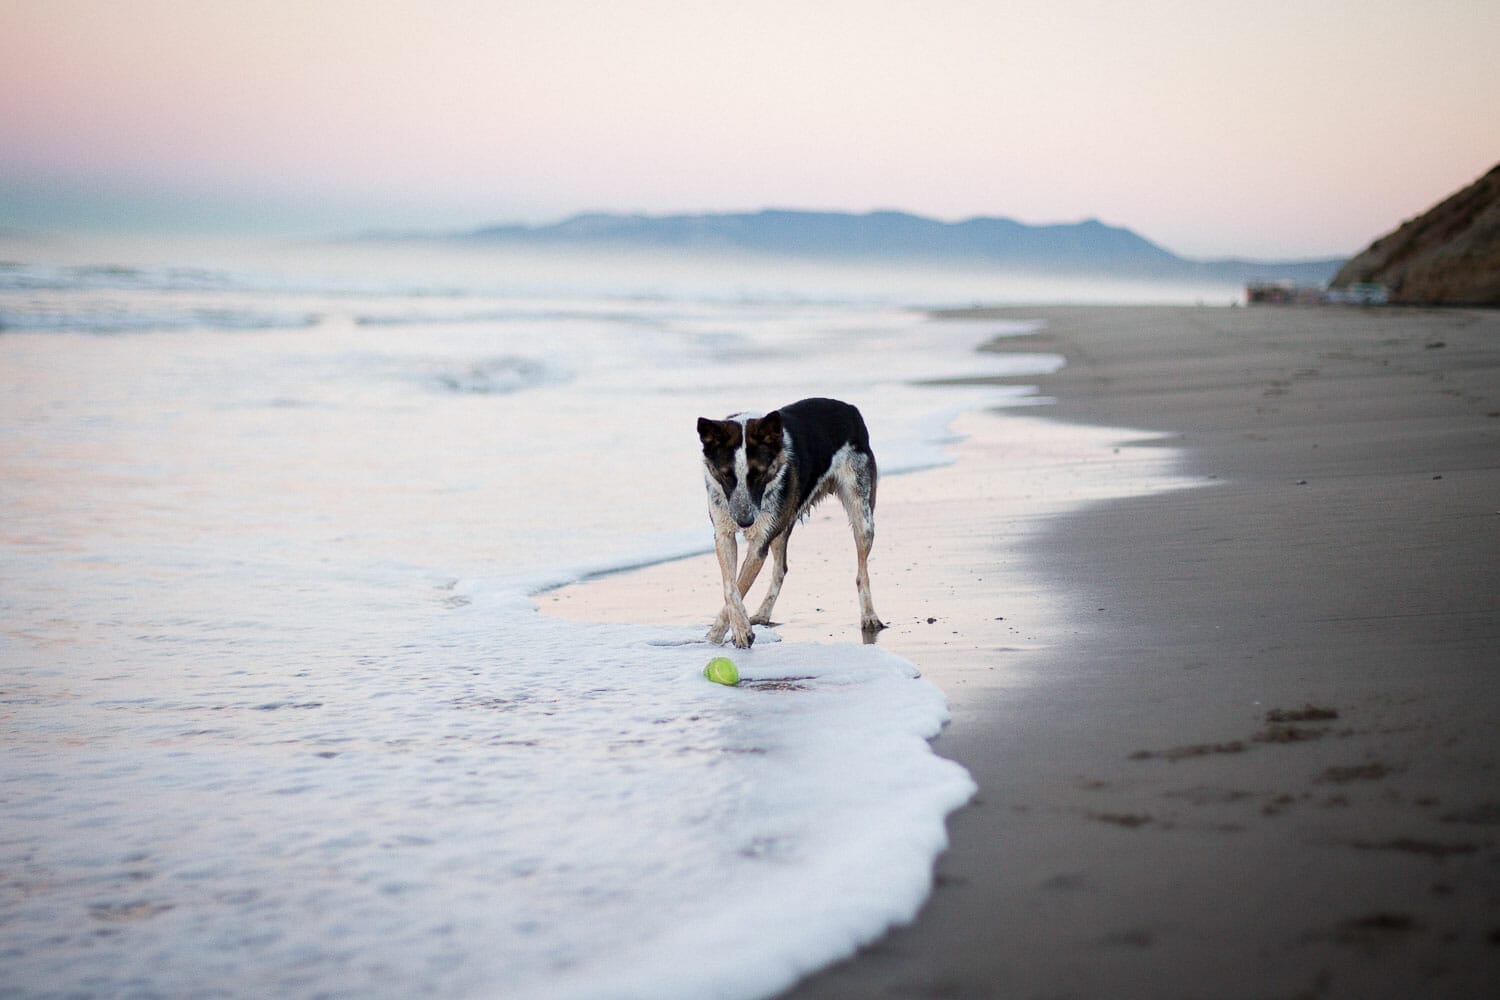 A dog standing on a beach with a ball near the water's edge at twilight.